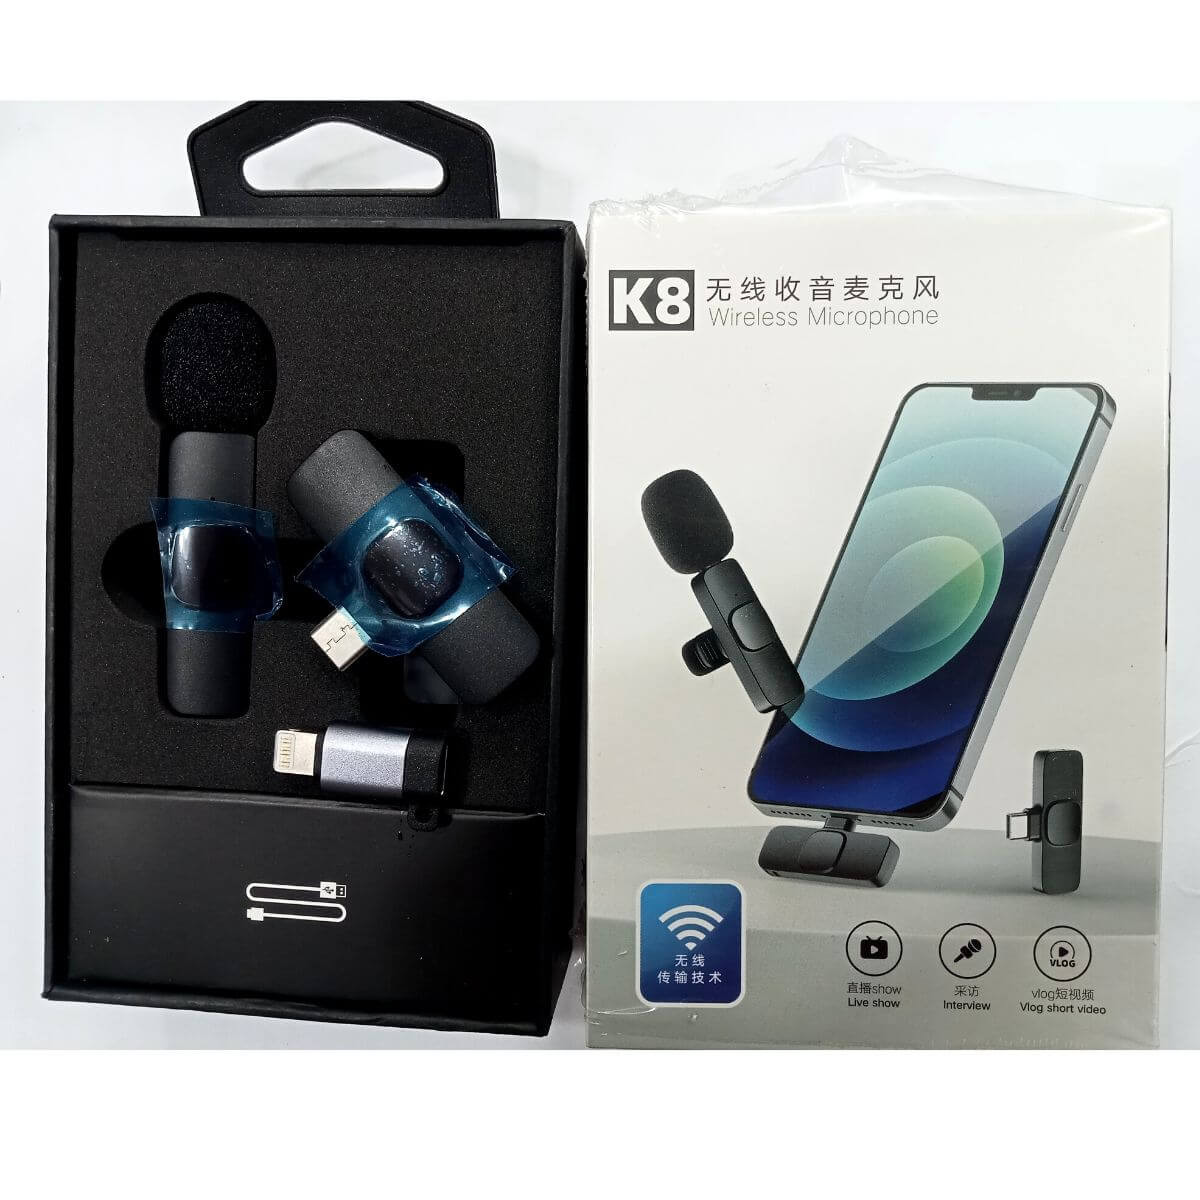 K8 Live Show Interview Wireless One Microphone {Ip...... BD